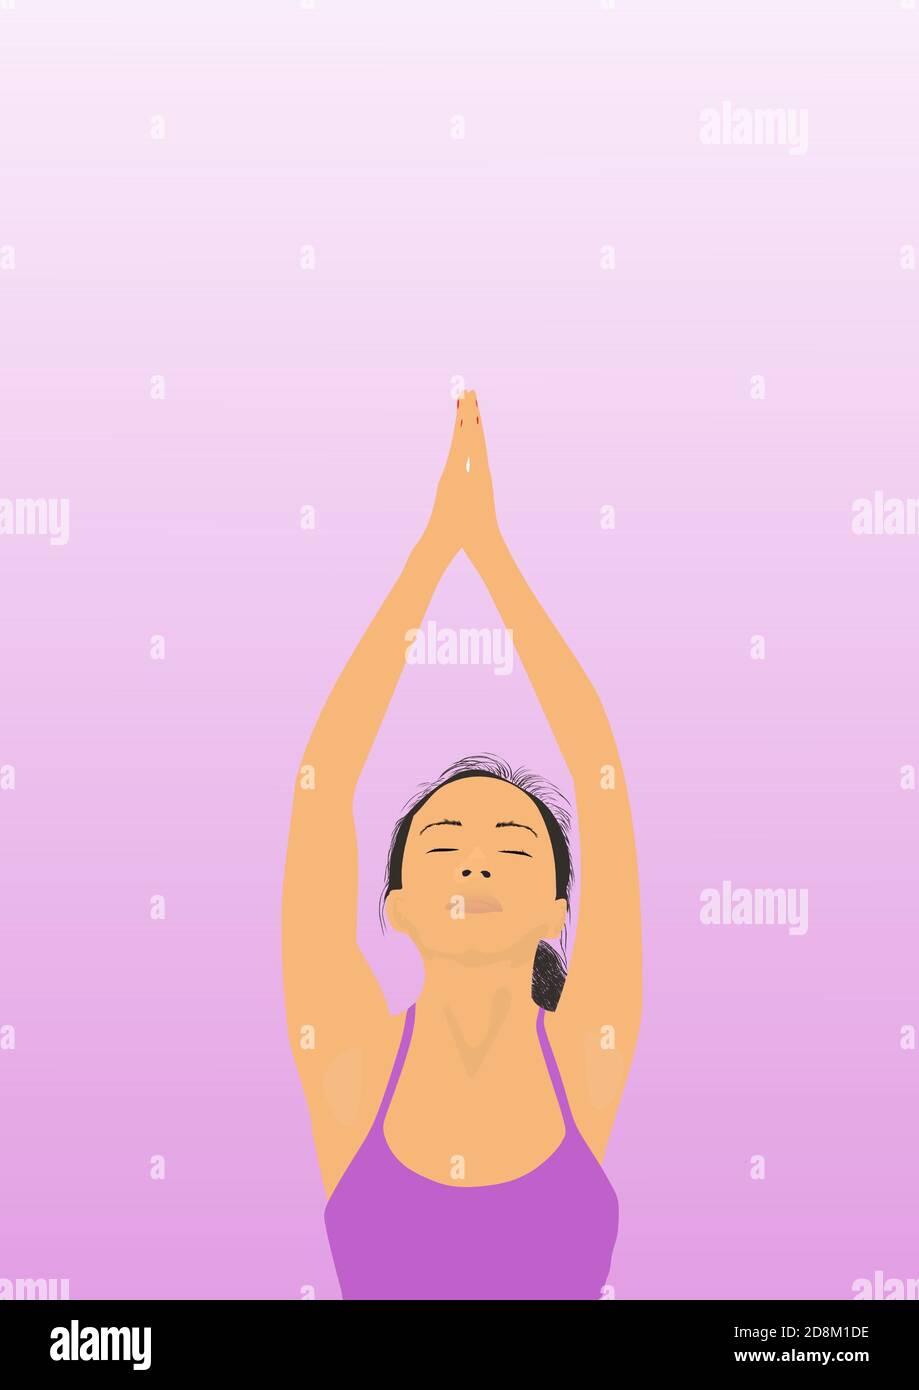 Vertical illustration with yoga woman. Stock Vector